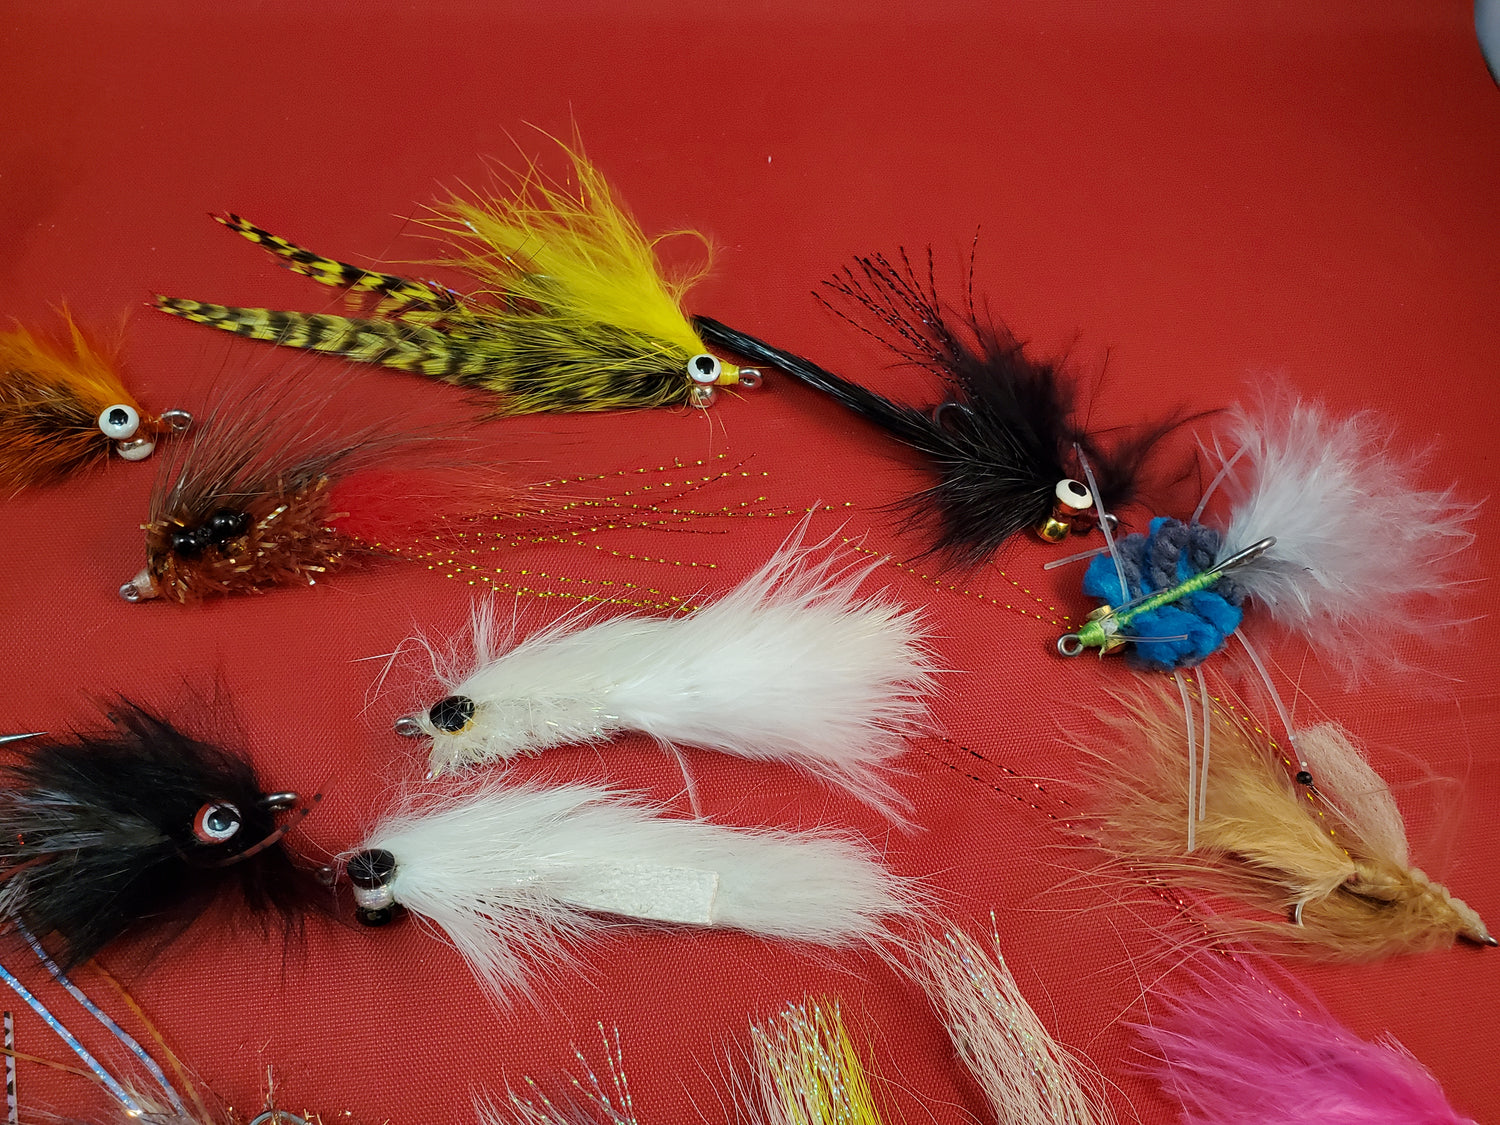 Salt Water Fly Selection, Capt Ken's Flats Selection, 21 Fly Flats